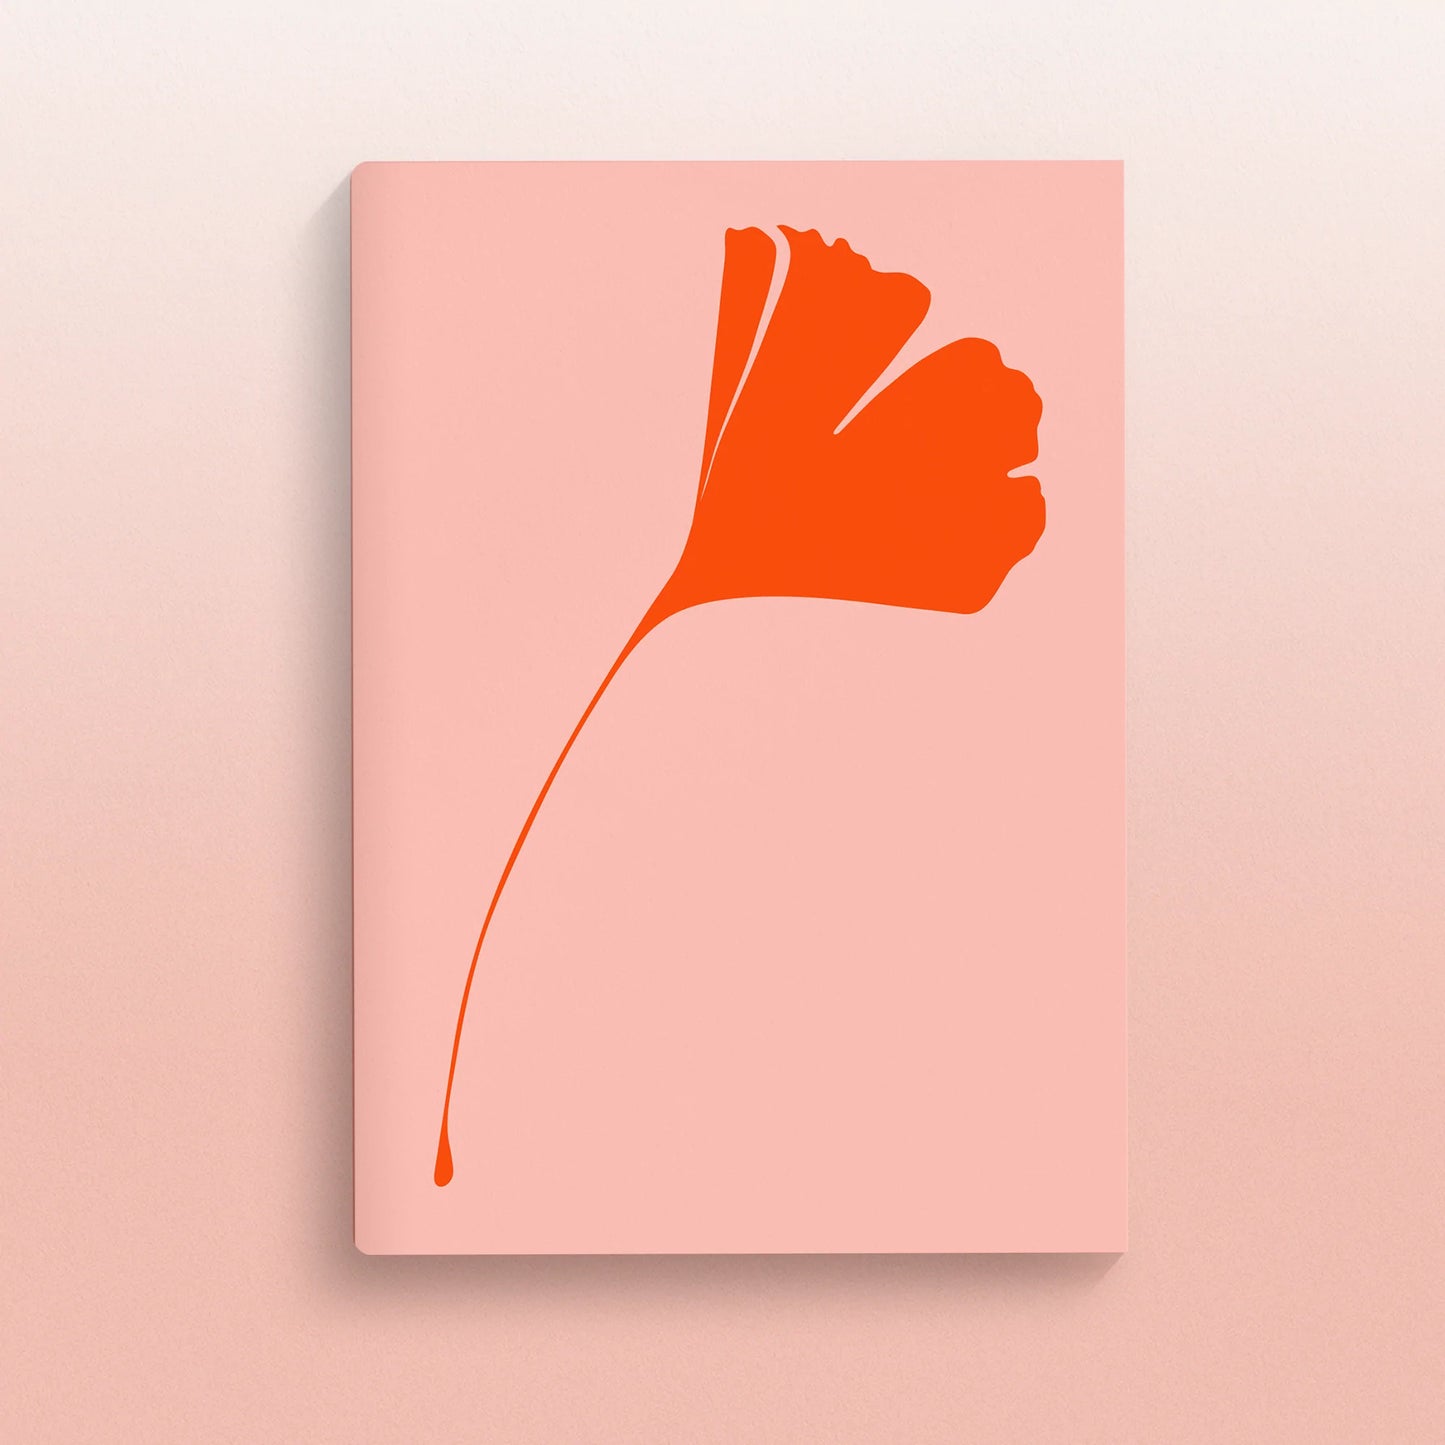 A5 notebook from the brand Common Modern. The cover has a pale pink background and a ginkgo leaf in orange.